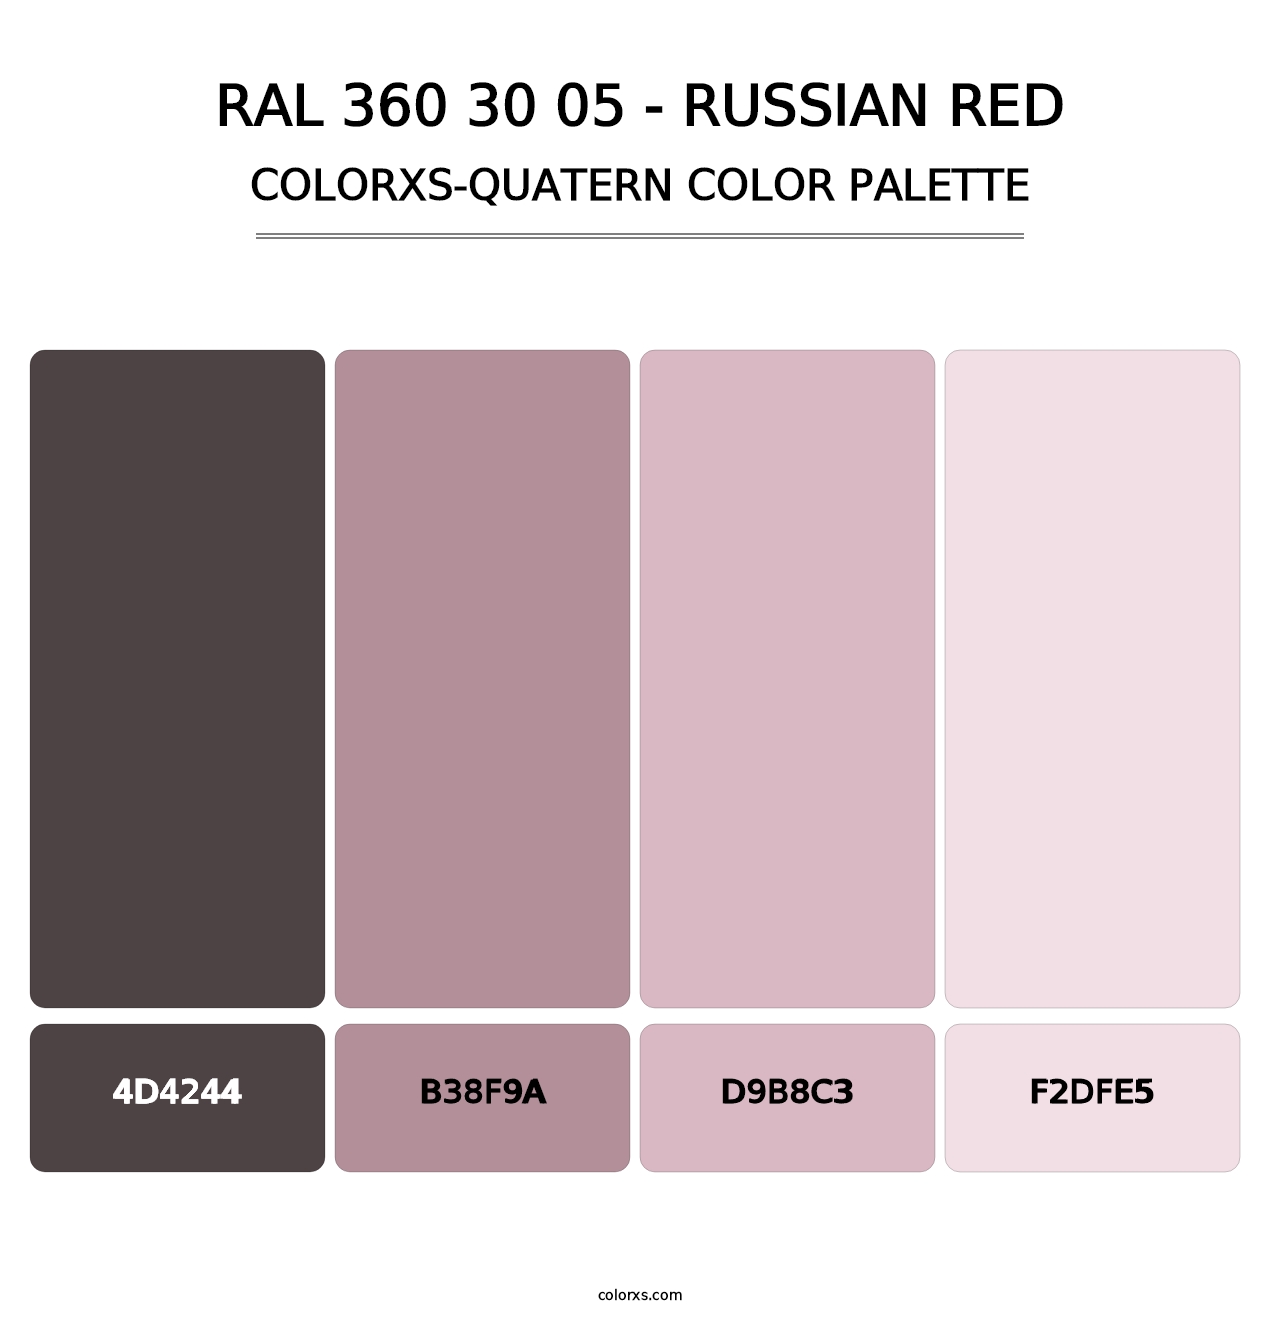 RAL 360 30 05 - Russian Red - Colorxs Quatern Palette